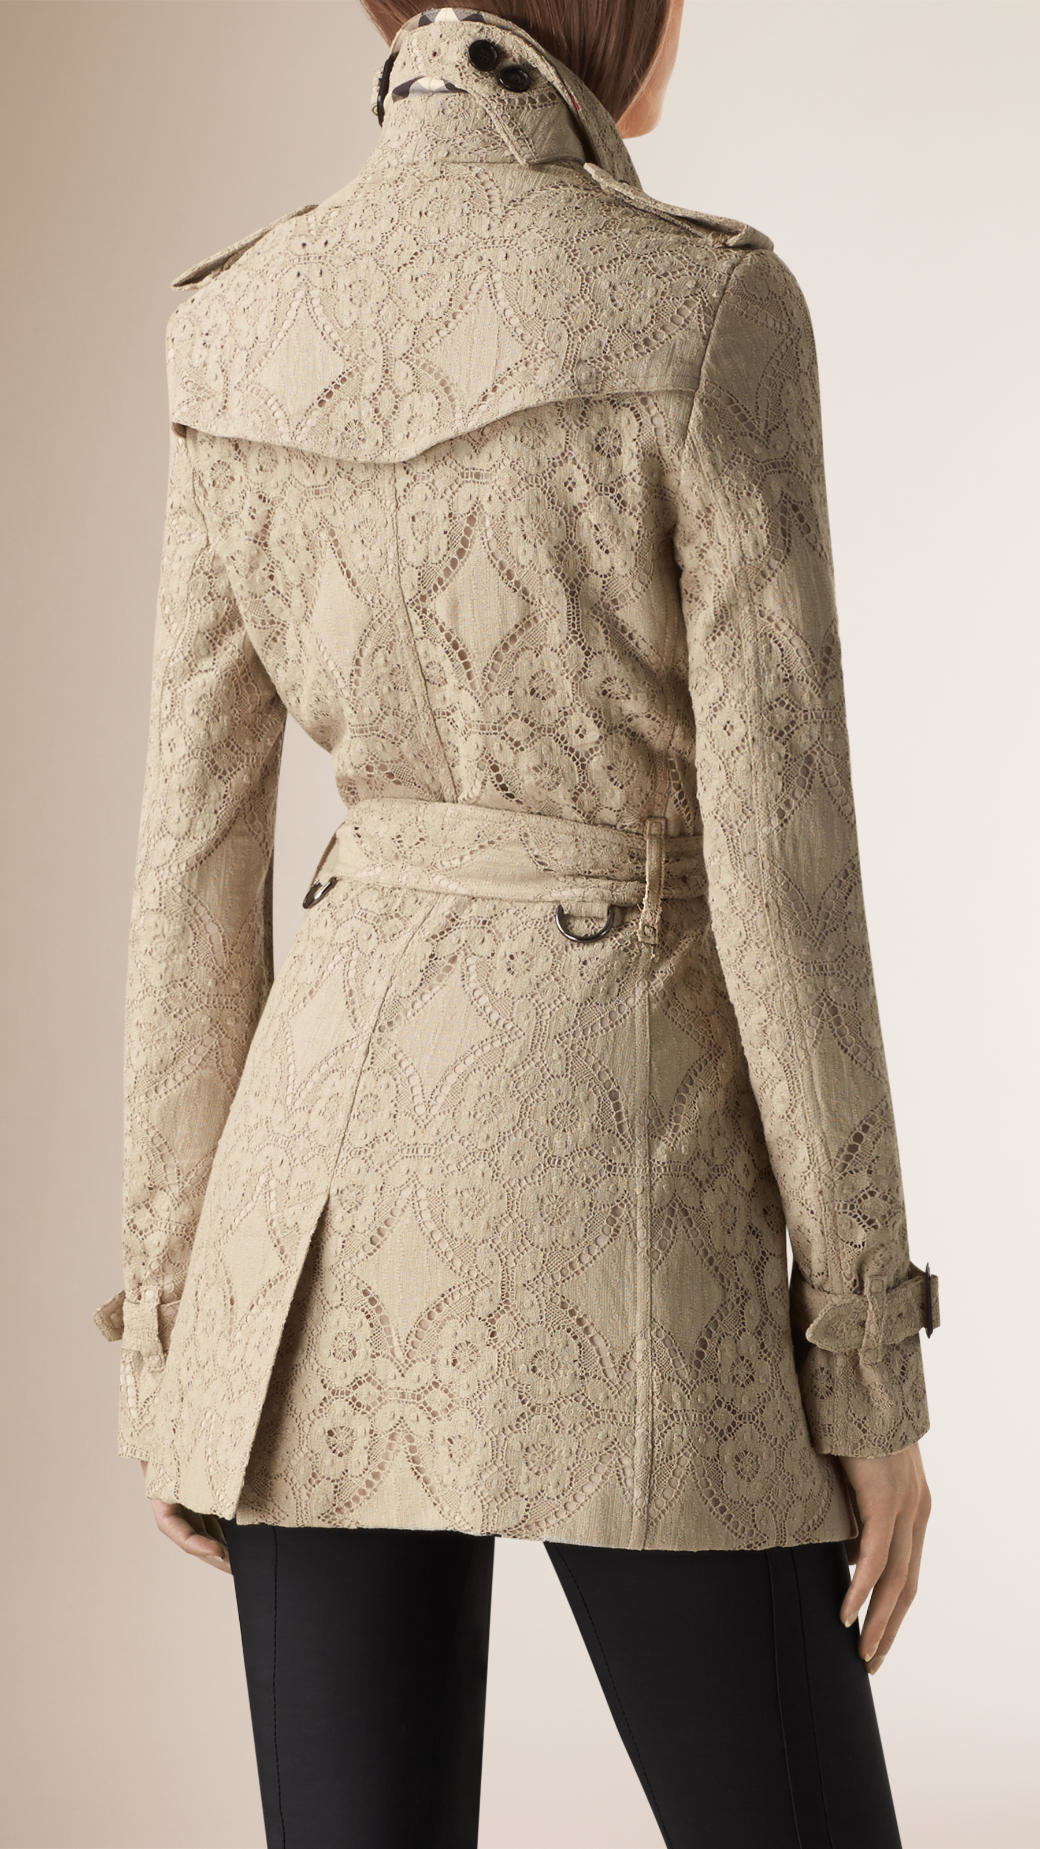 Burberry Gabardine Lace Trench Coat in Beige (Natural) - Lyst